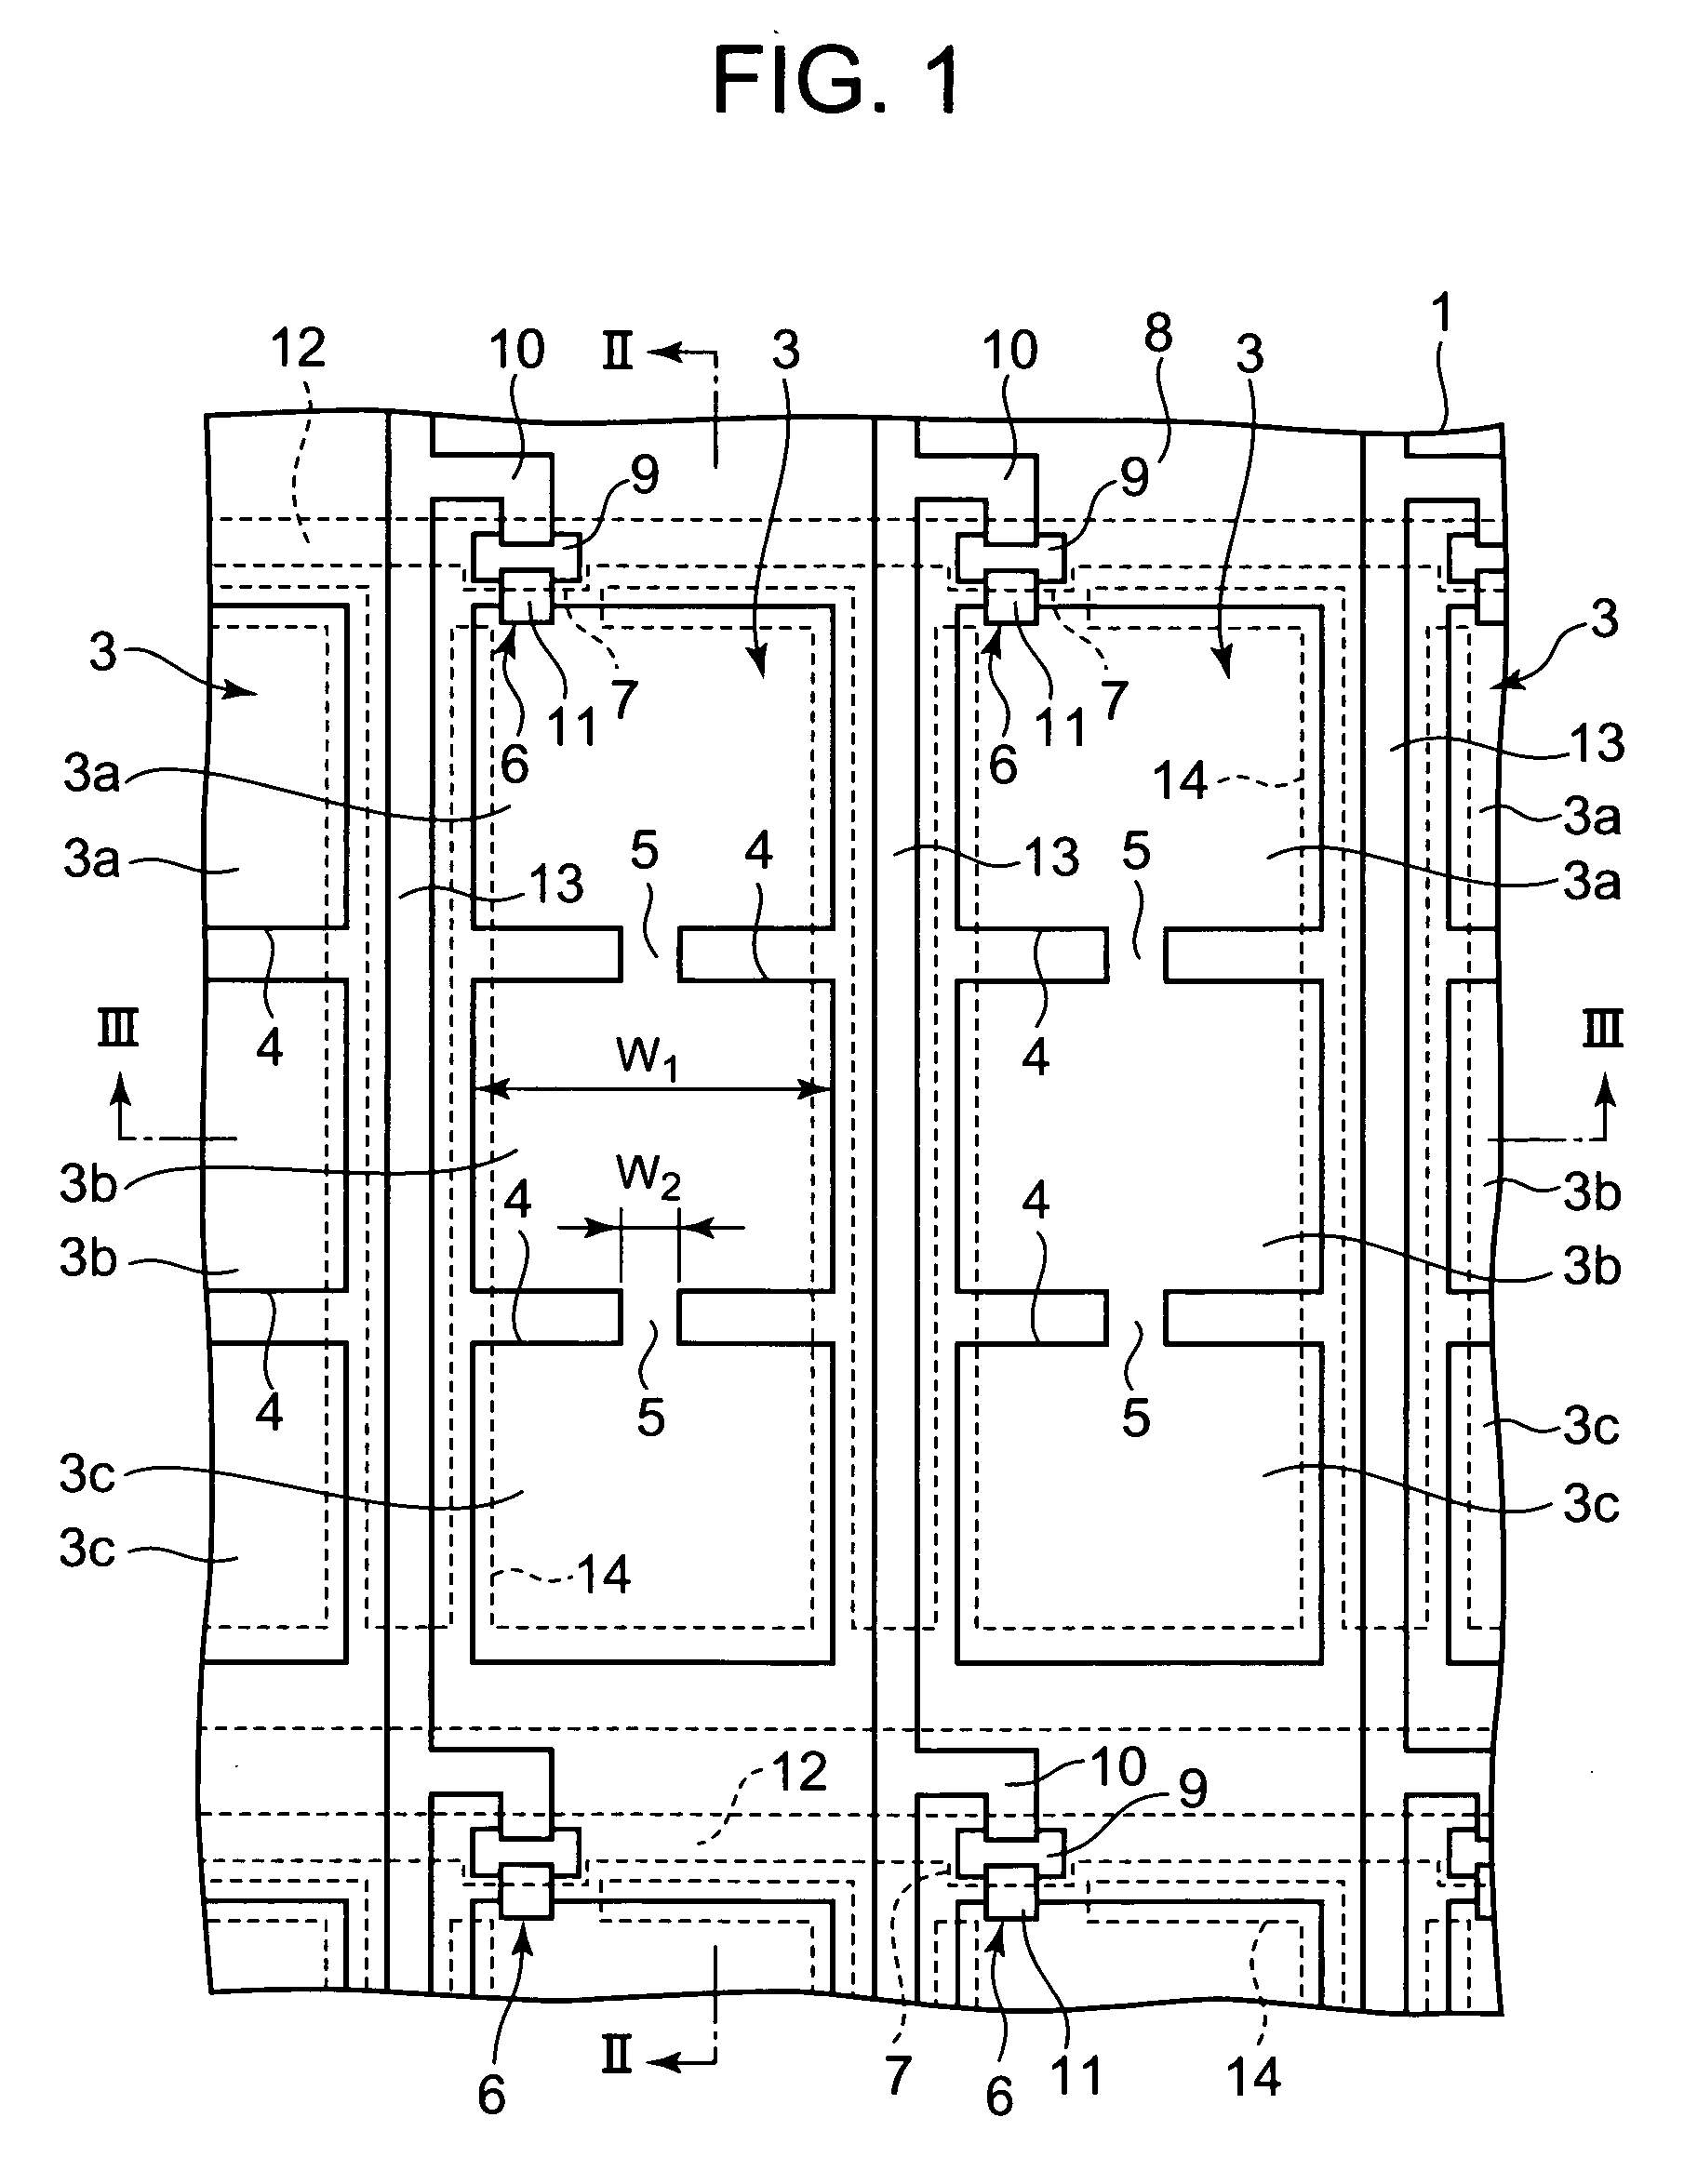 Vertical alignment liquid crystal display device